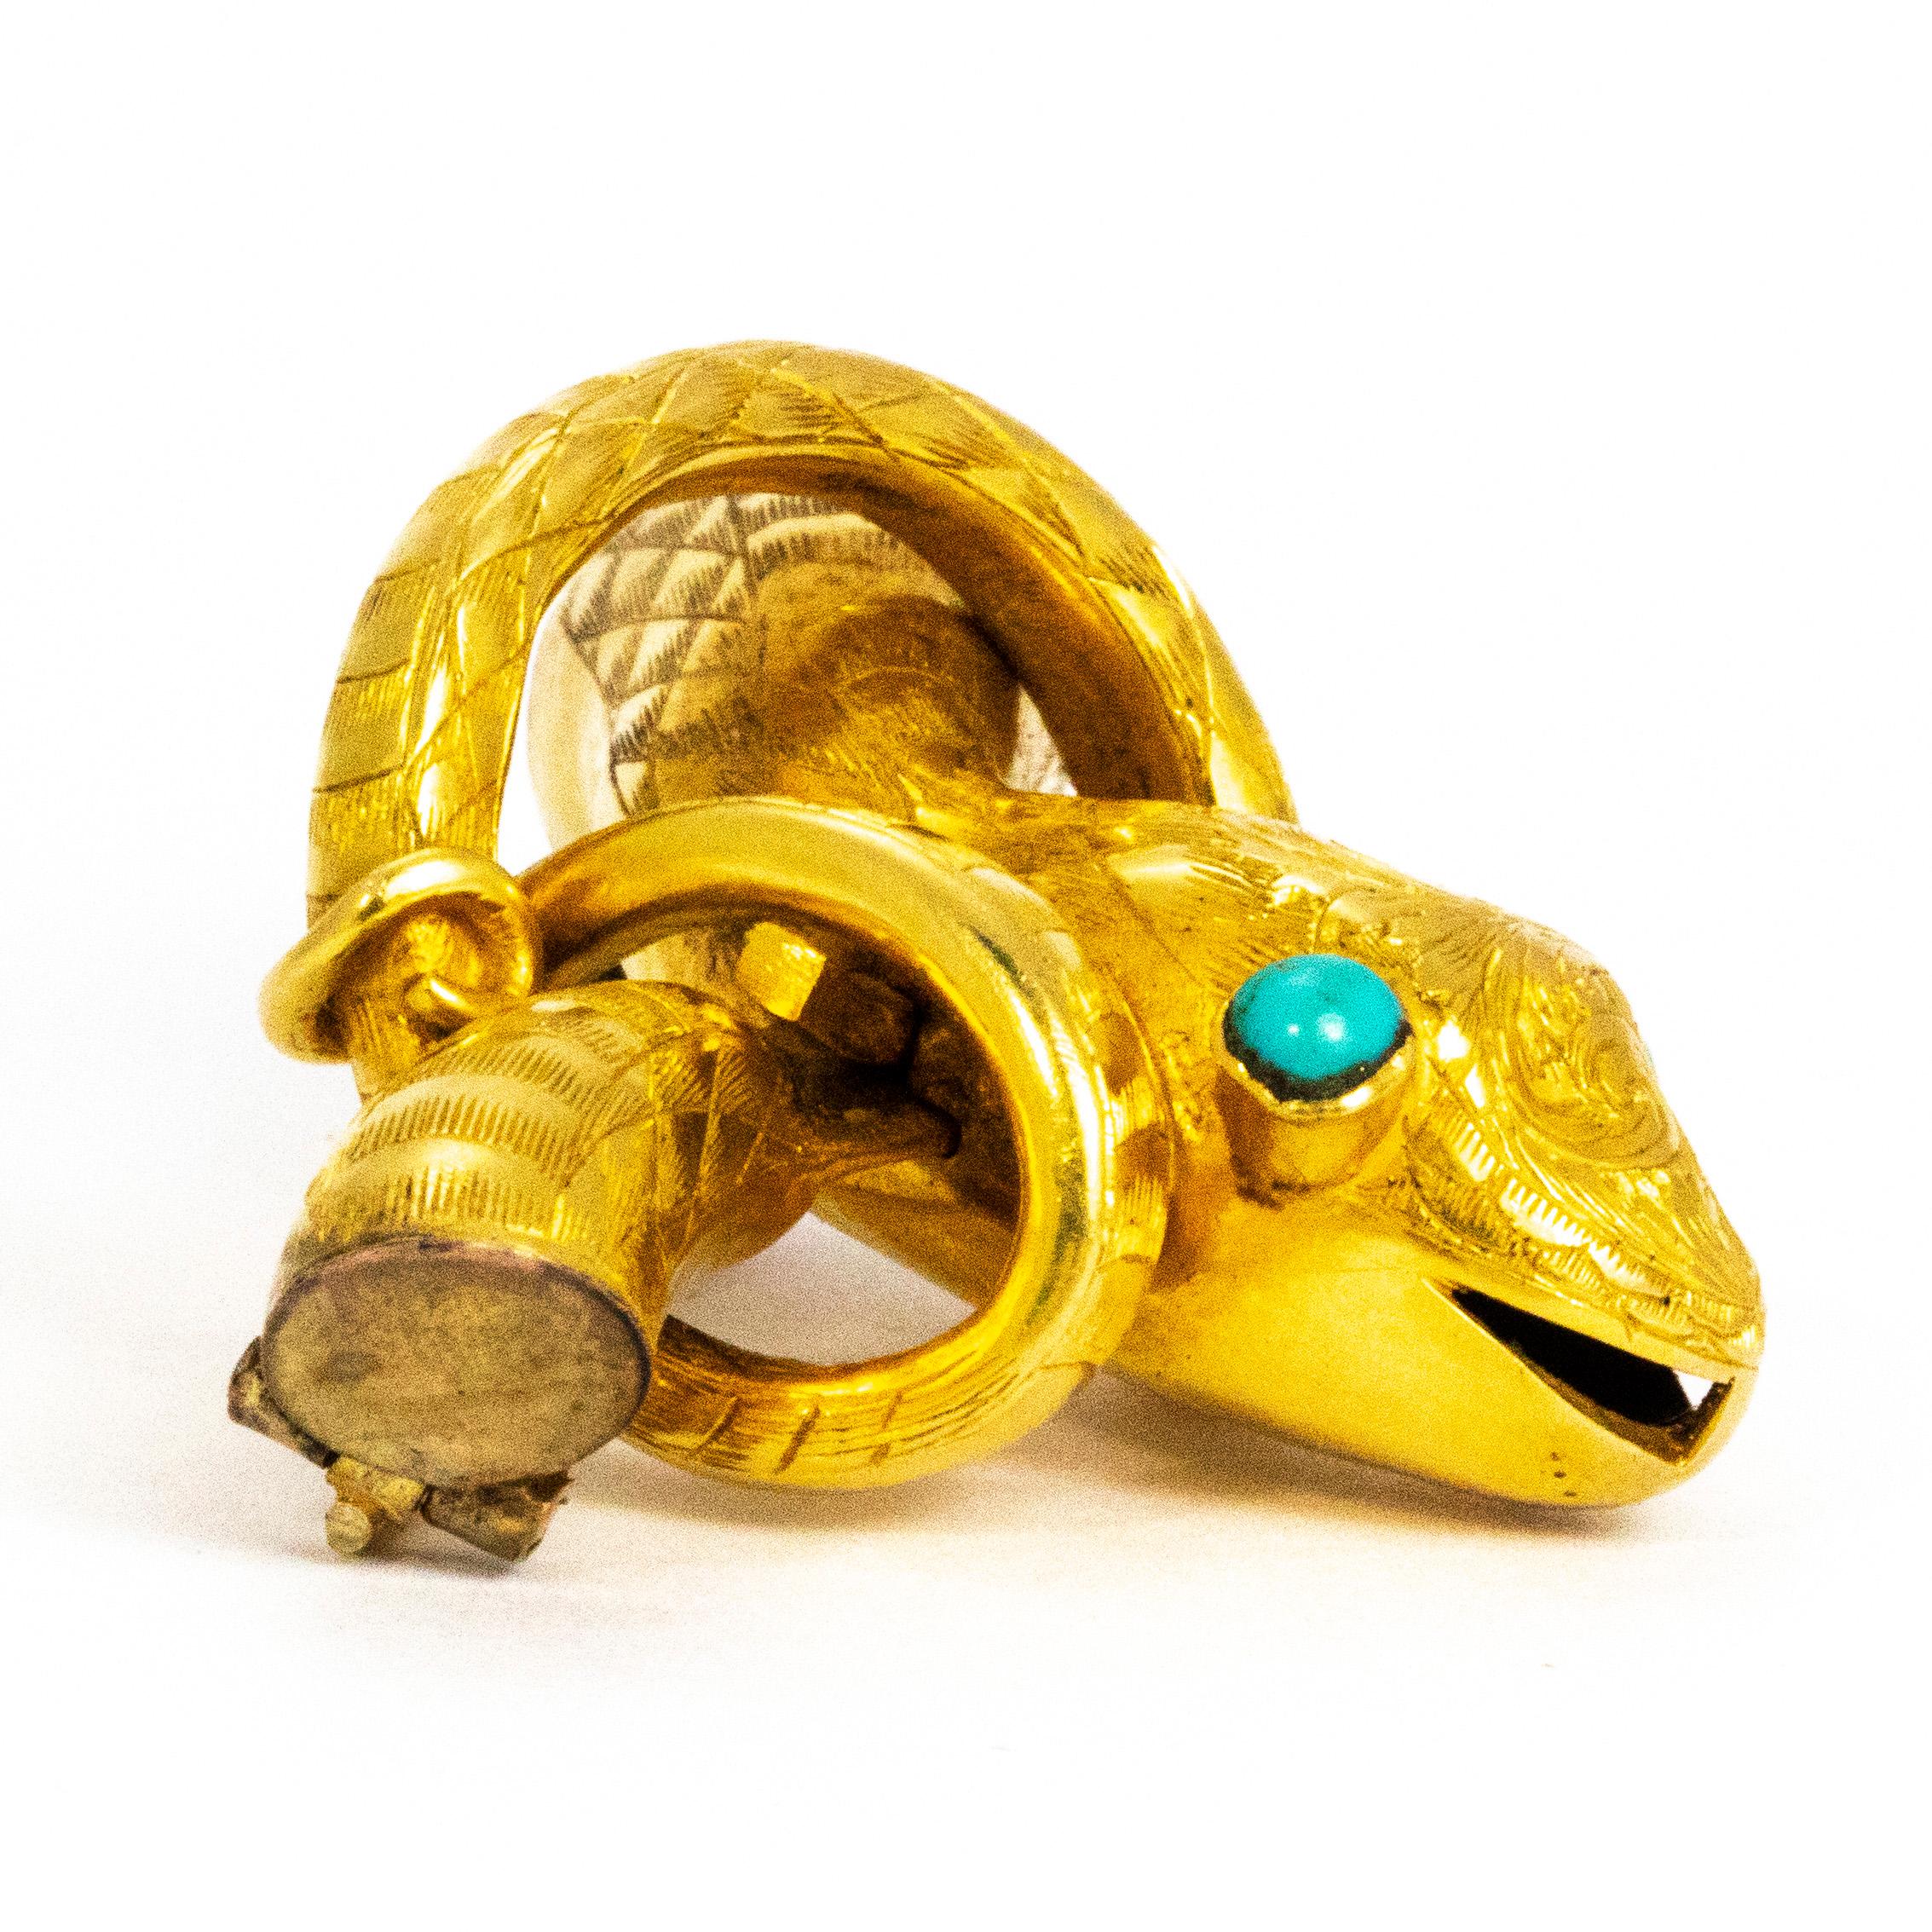 This wonderful snake brooch is so quirky and stylish! The eyes of the snake are set with turquoise and the body is modelled in yellow metal. The body is exquisitely engraved with the finest detail. As you will notice the detail on the face of the